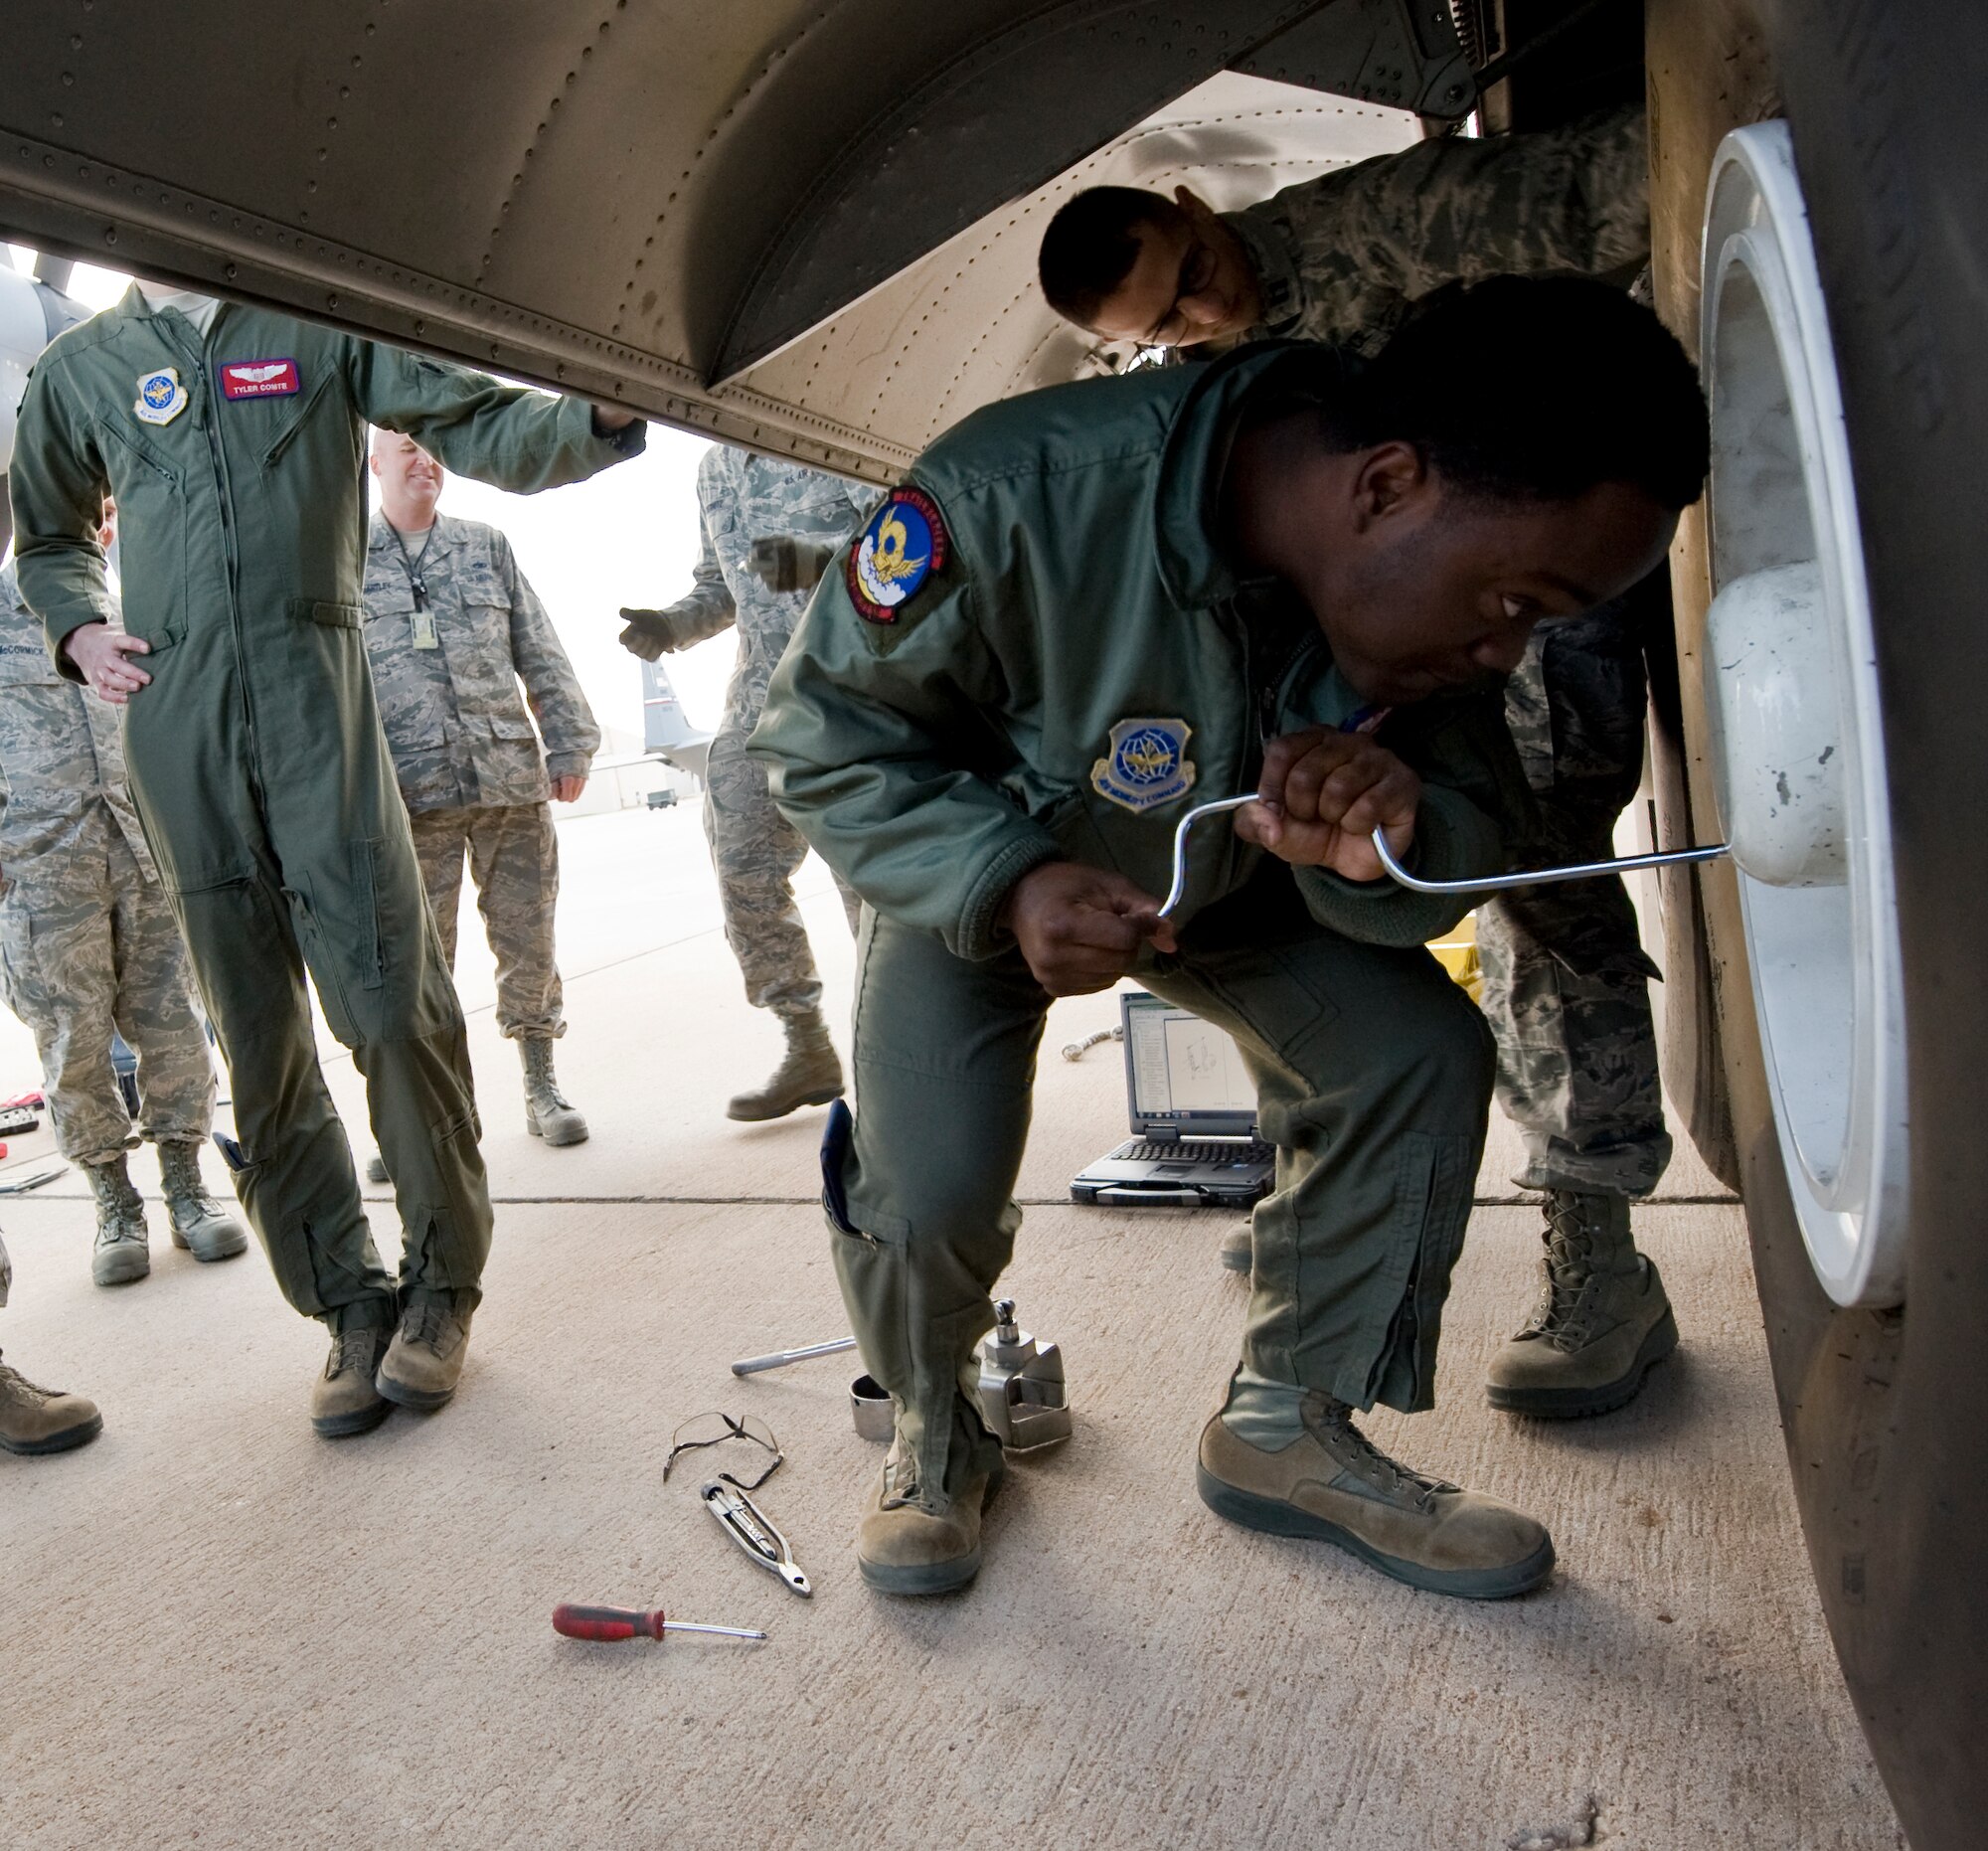 Airman 1st Class Jaime Richardson-Granger, 39th Airlift Squadron, changes a tire on a C-130J during Impact Day Dec. 7, 2012, at Dyess Air Force Base, Texas. Impact Day gave aircrew the opportunity to see what it takes to generate an aircraft with hands-on experience. The aircrew also learned how to pack a parachute, maintain a C-130J and repair a leak in a fuel cell. (U.S. Air Force photo by Airman 1st Class Jonathan Stefanko/ Released)